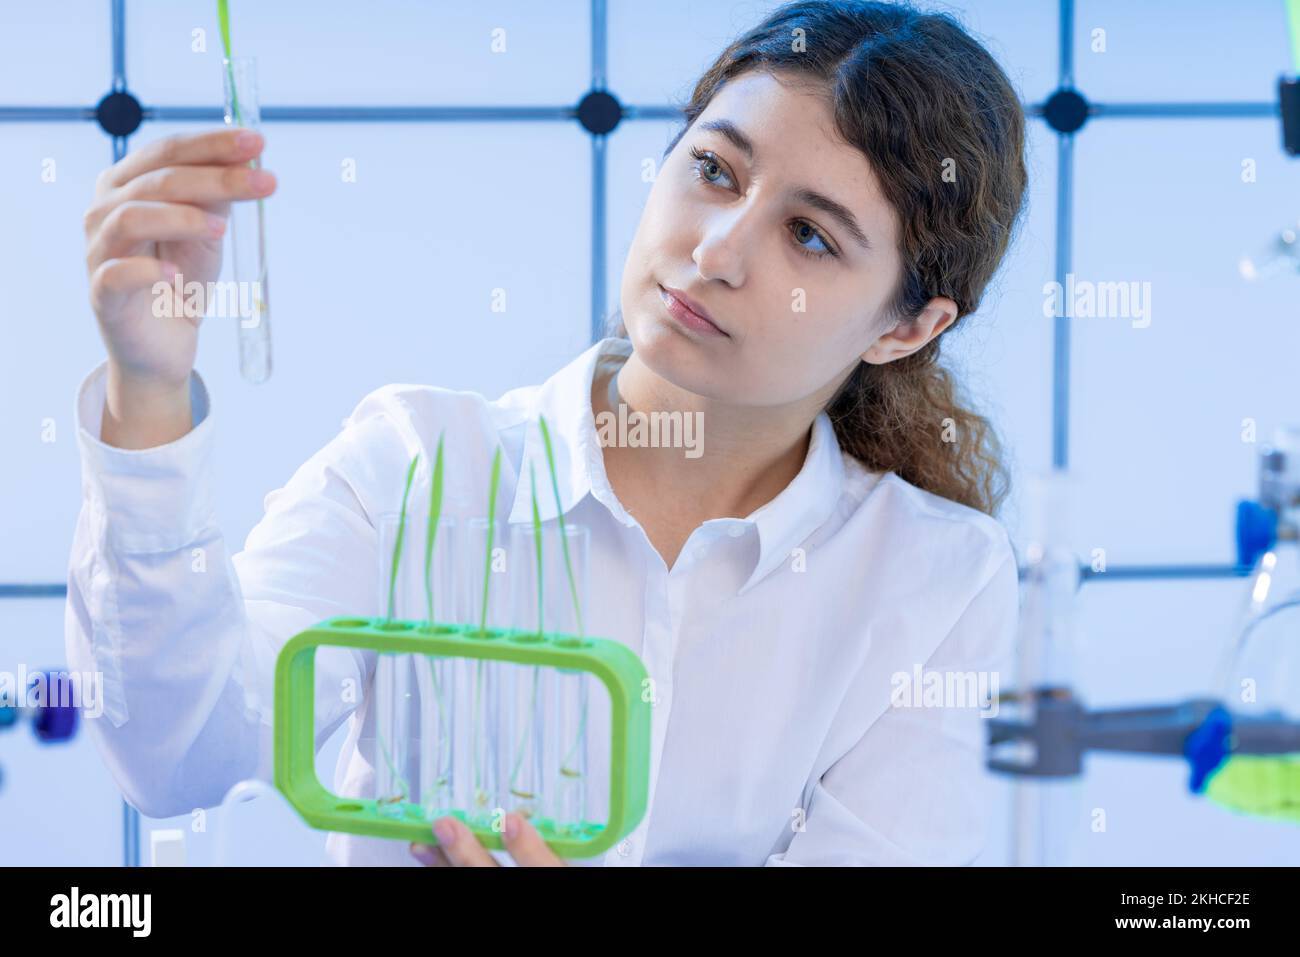 young adult woman scientist doing experiment with wheat sprouts in genetic modification laboratory Stock Photo